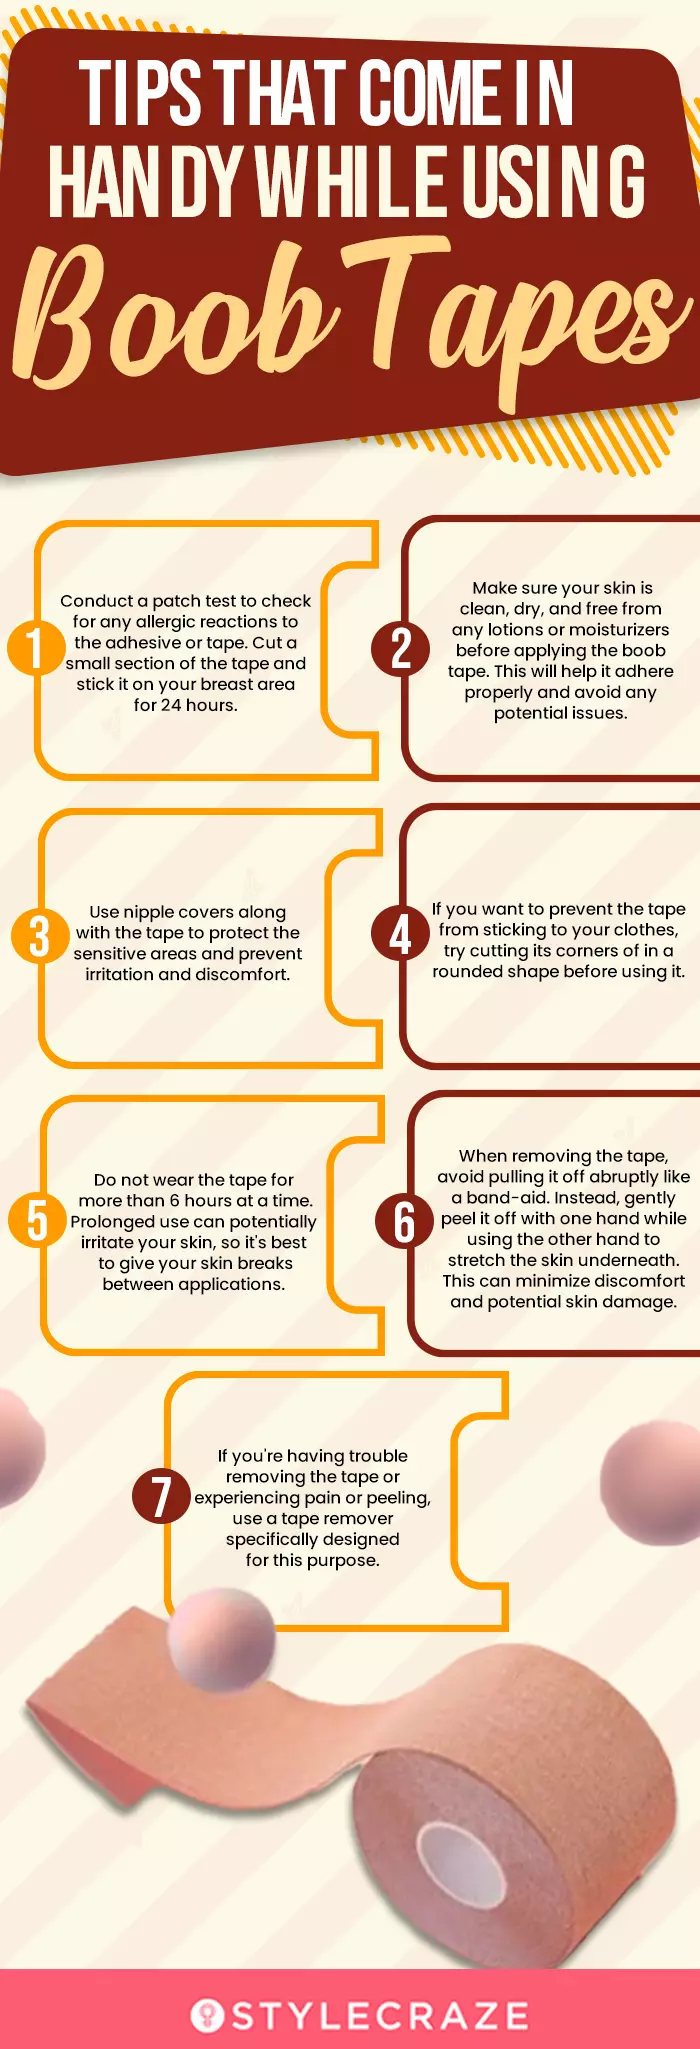 Tips That Come In Handy While Using Boob Tapes (infographic)